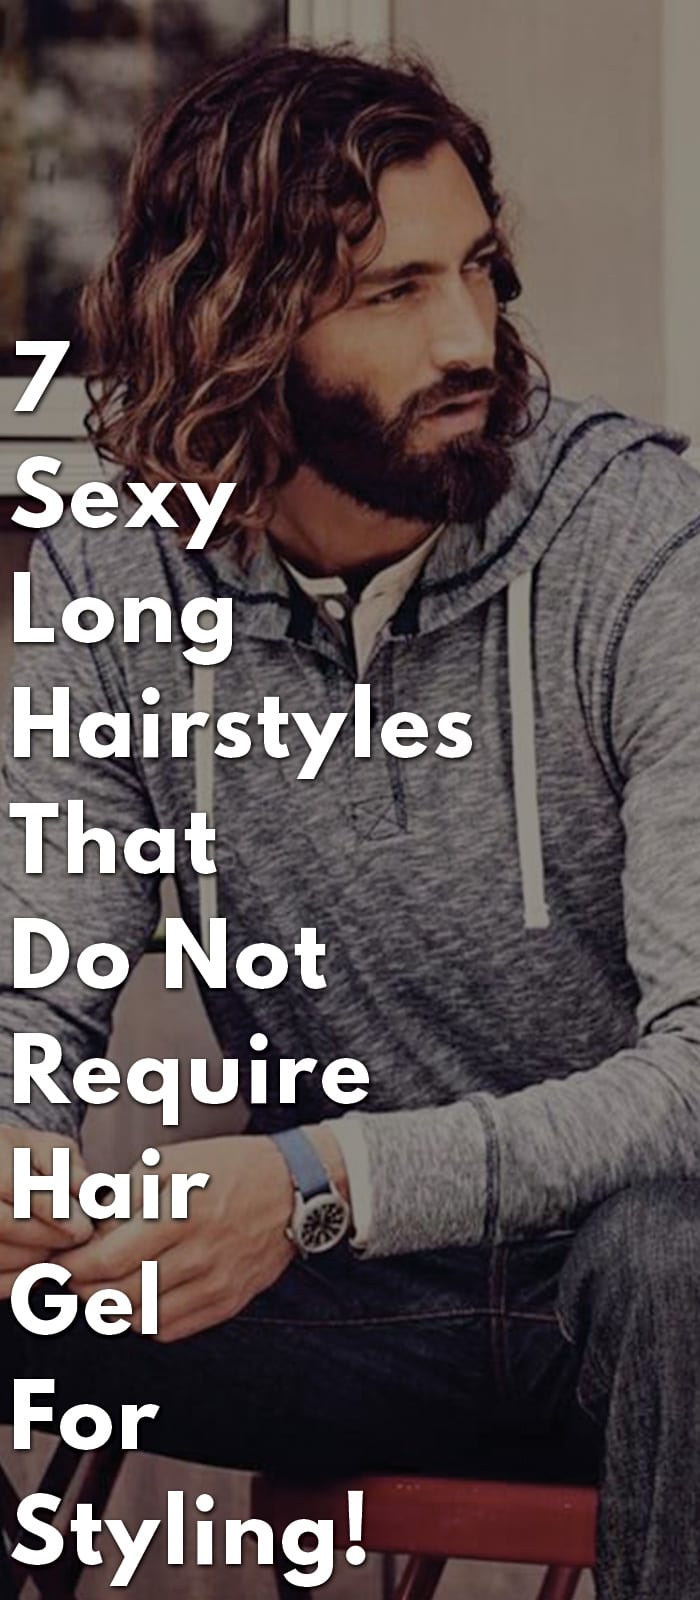 7-Sexy-Long-Hairstyles-That-Do-Not-Require-Hair-Gel-For-Styling!